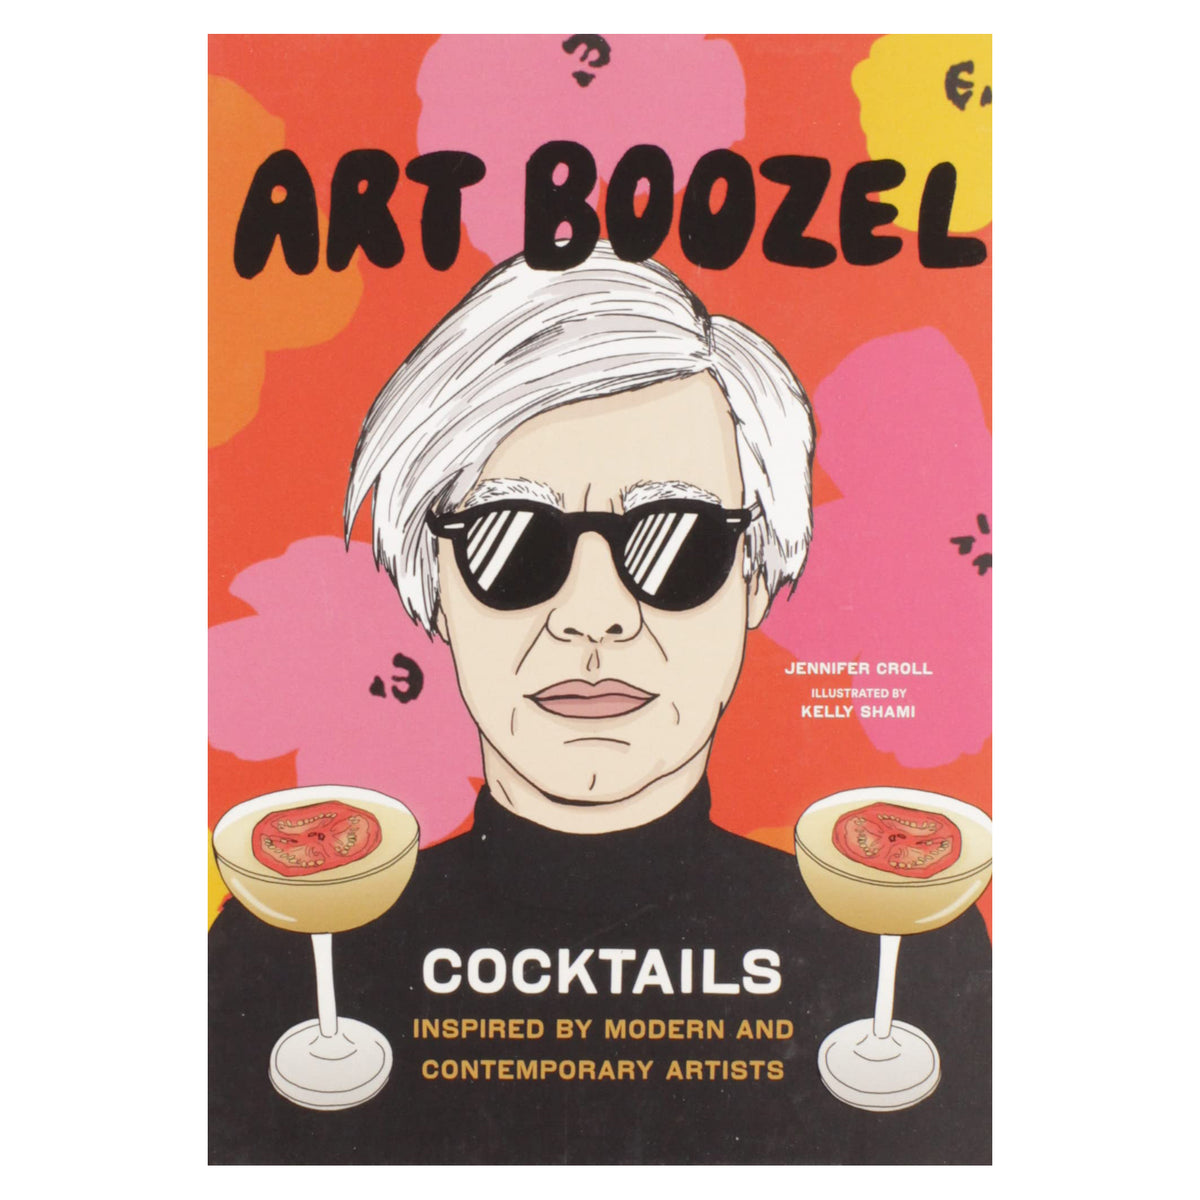 Art Boozel Cocktails Inspired by Modern and Contemporary Artists